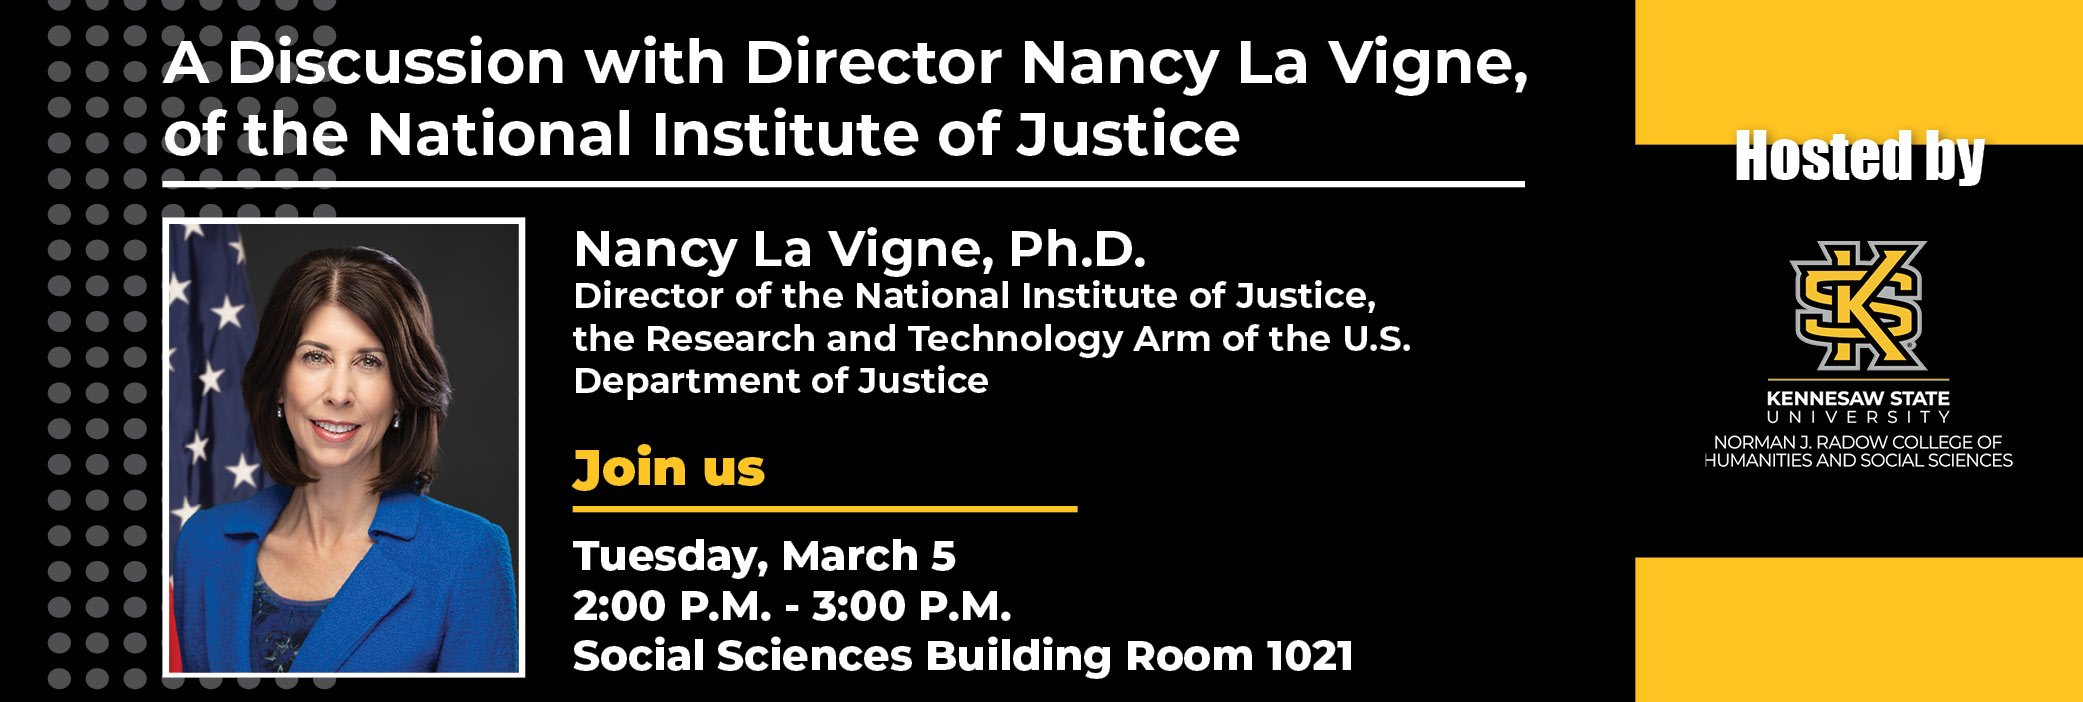 A Discussion with Director Nancy La Vigne of the National Institute of Justice